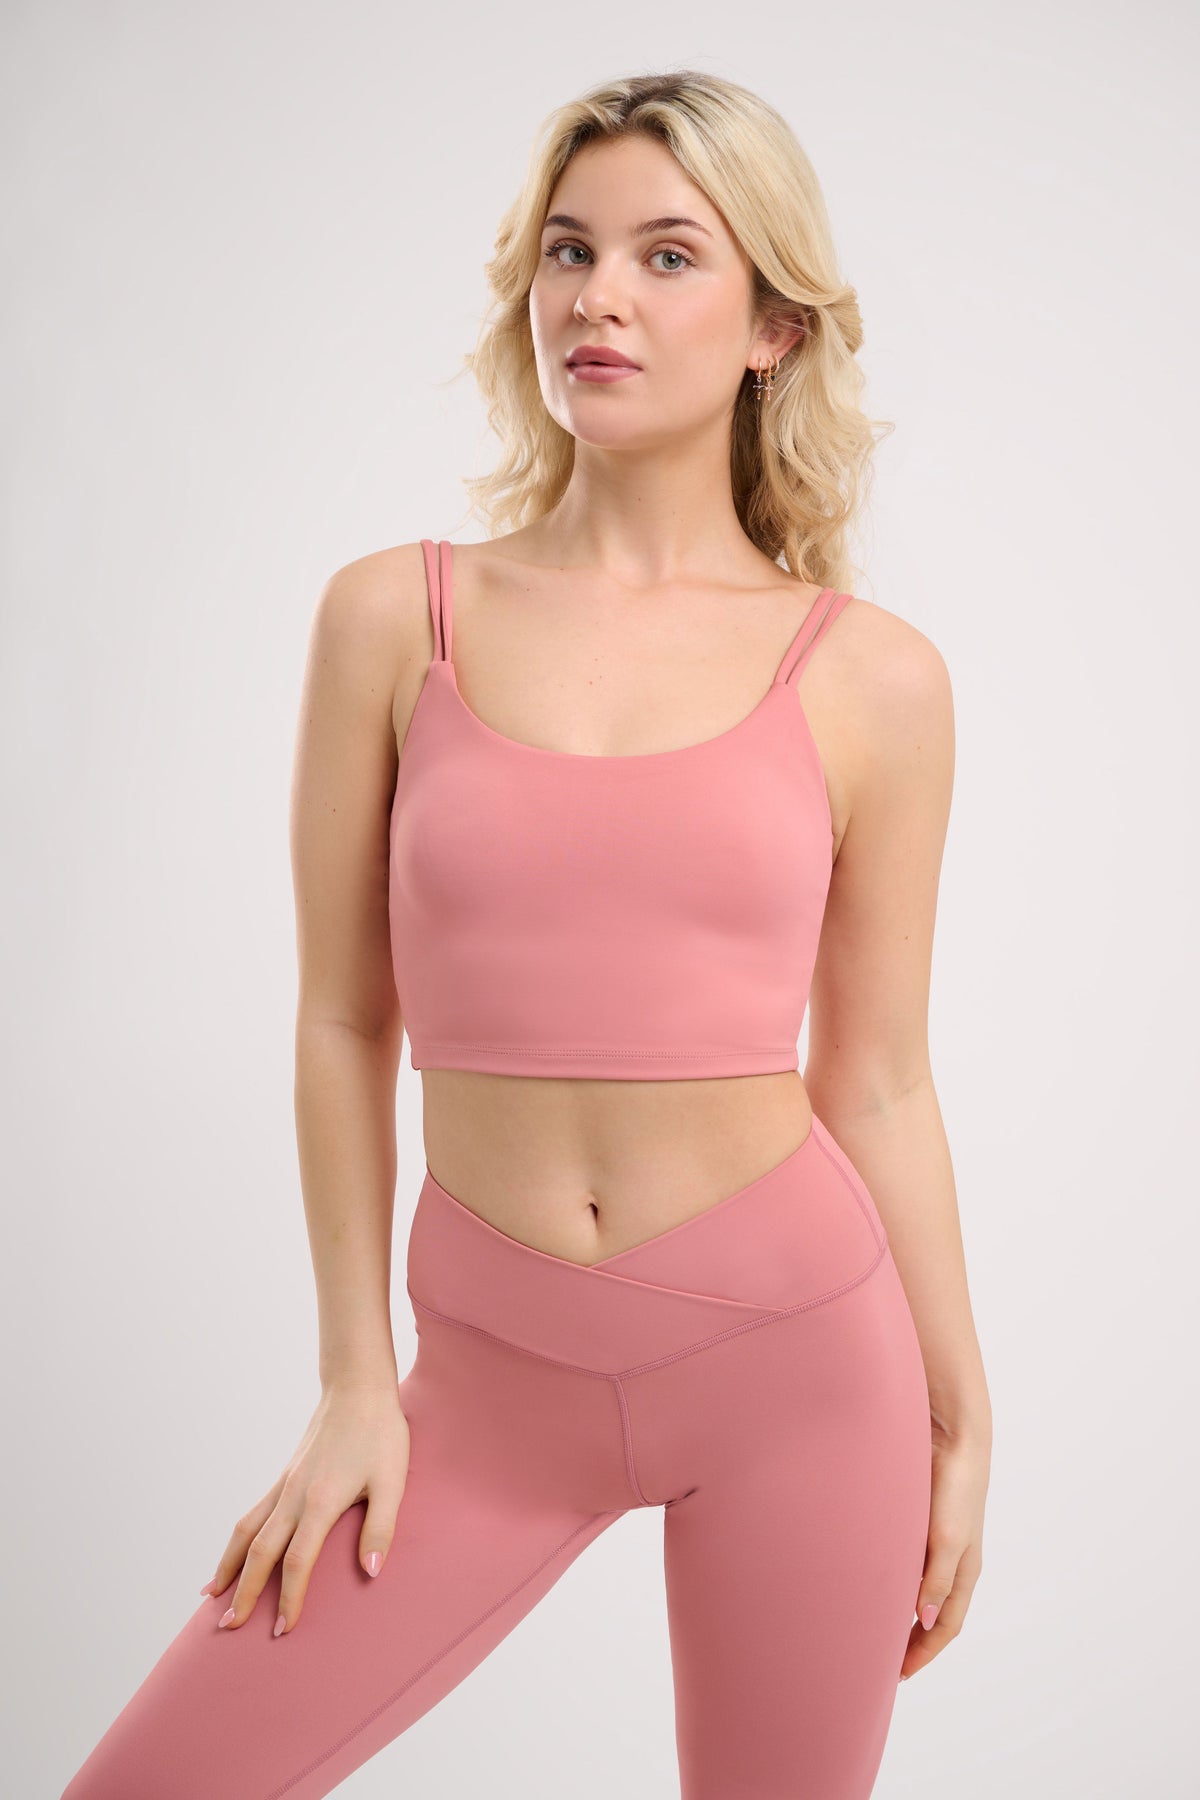 pink womens yoga top by NE Activwear  modelled  by a blonde woman